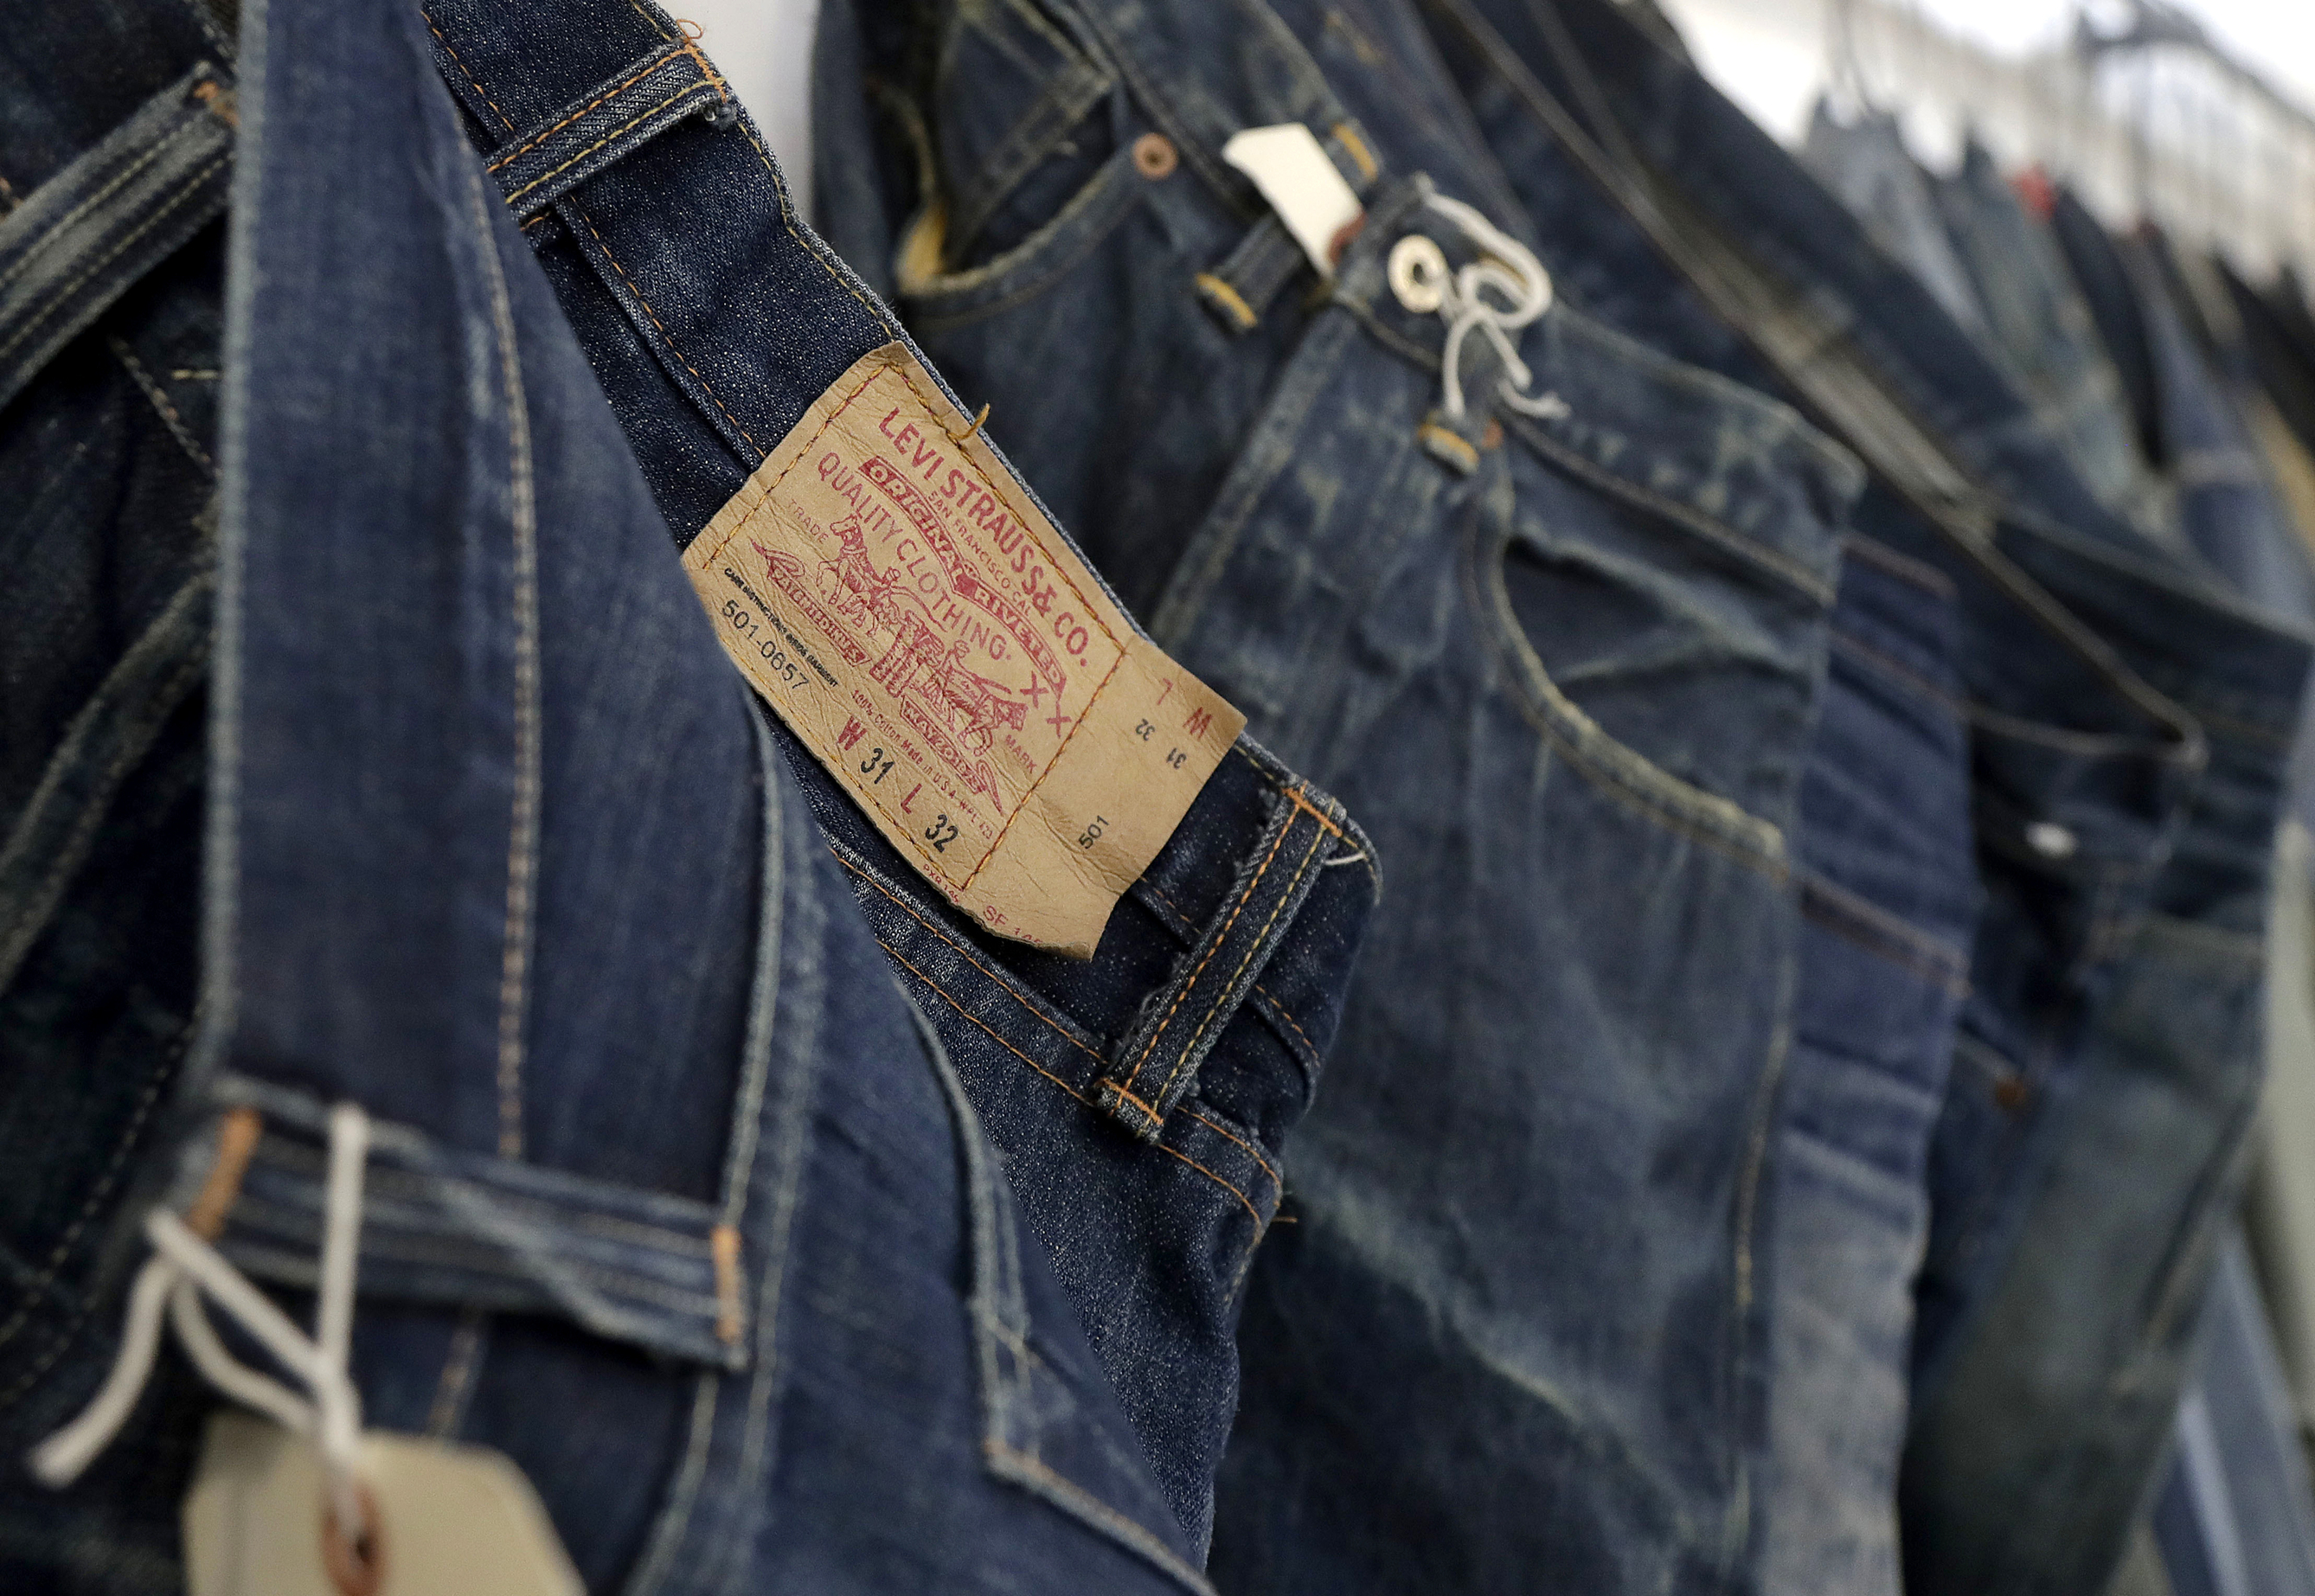 19th-century Levi's jeans sold at a New Mexico auction for $87K -  